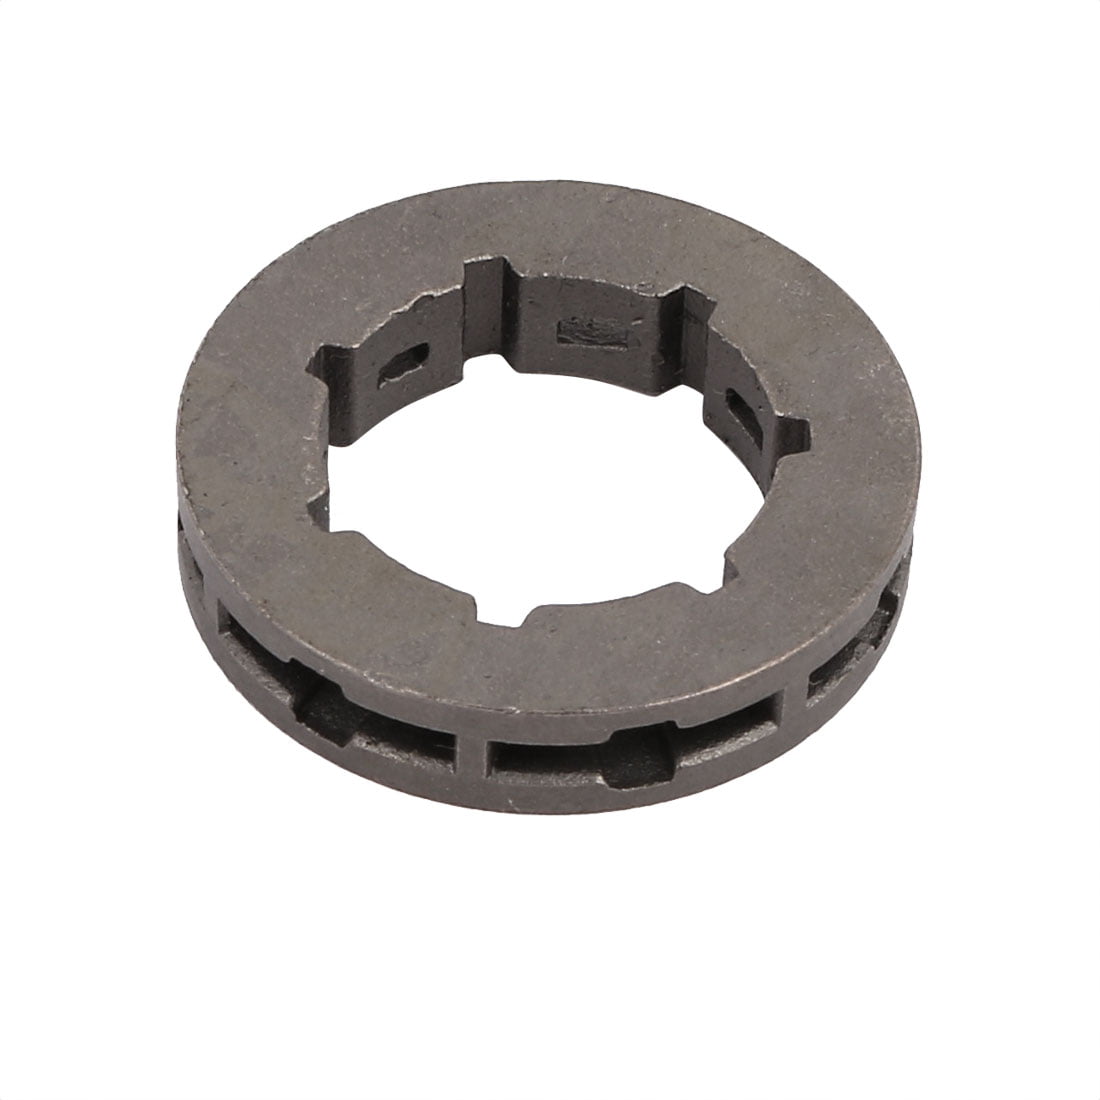 Chain Sprocket Rim 325-7 Model 7 Tooth Replacement for Chainsaw NicY*WA 